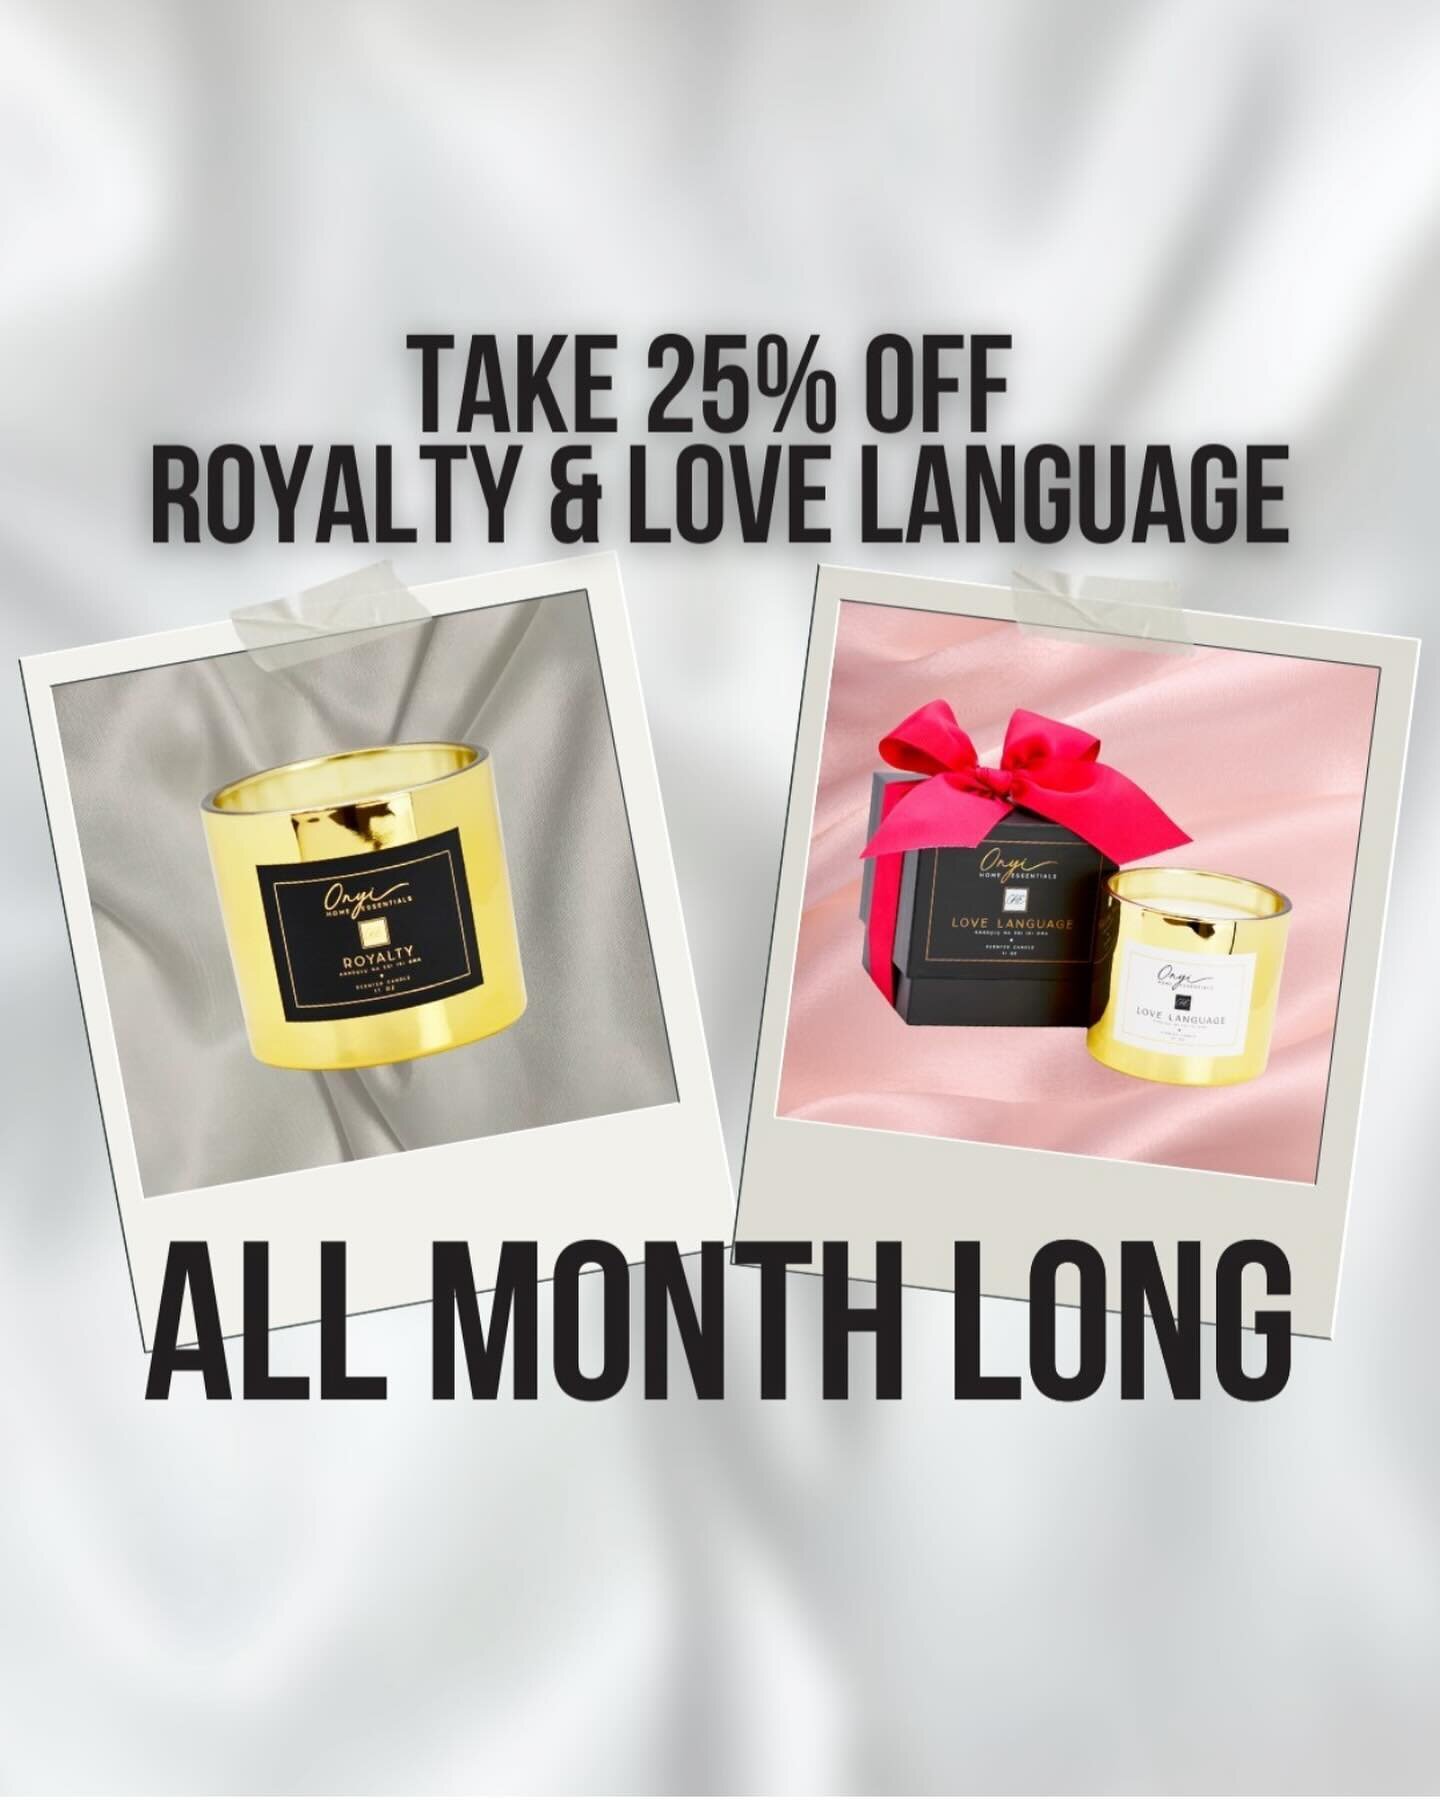 It&rsquo;s Black History Month &amp; the month that we celebrate love! Treat yourself and someone you love to our Onyi bundle or send to that special someone.

THIS MONTH ONLY take 25% off ROYALTY &amp; LOVE LANGUAGE. 

Use Promo Code: BLK25 or LOVE2